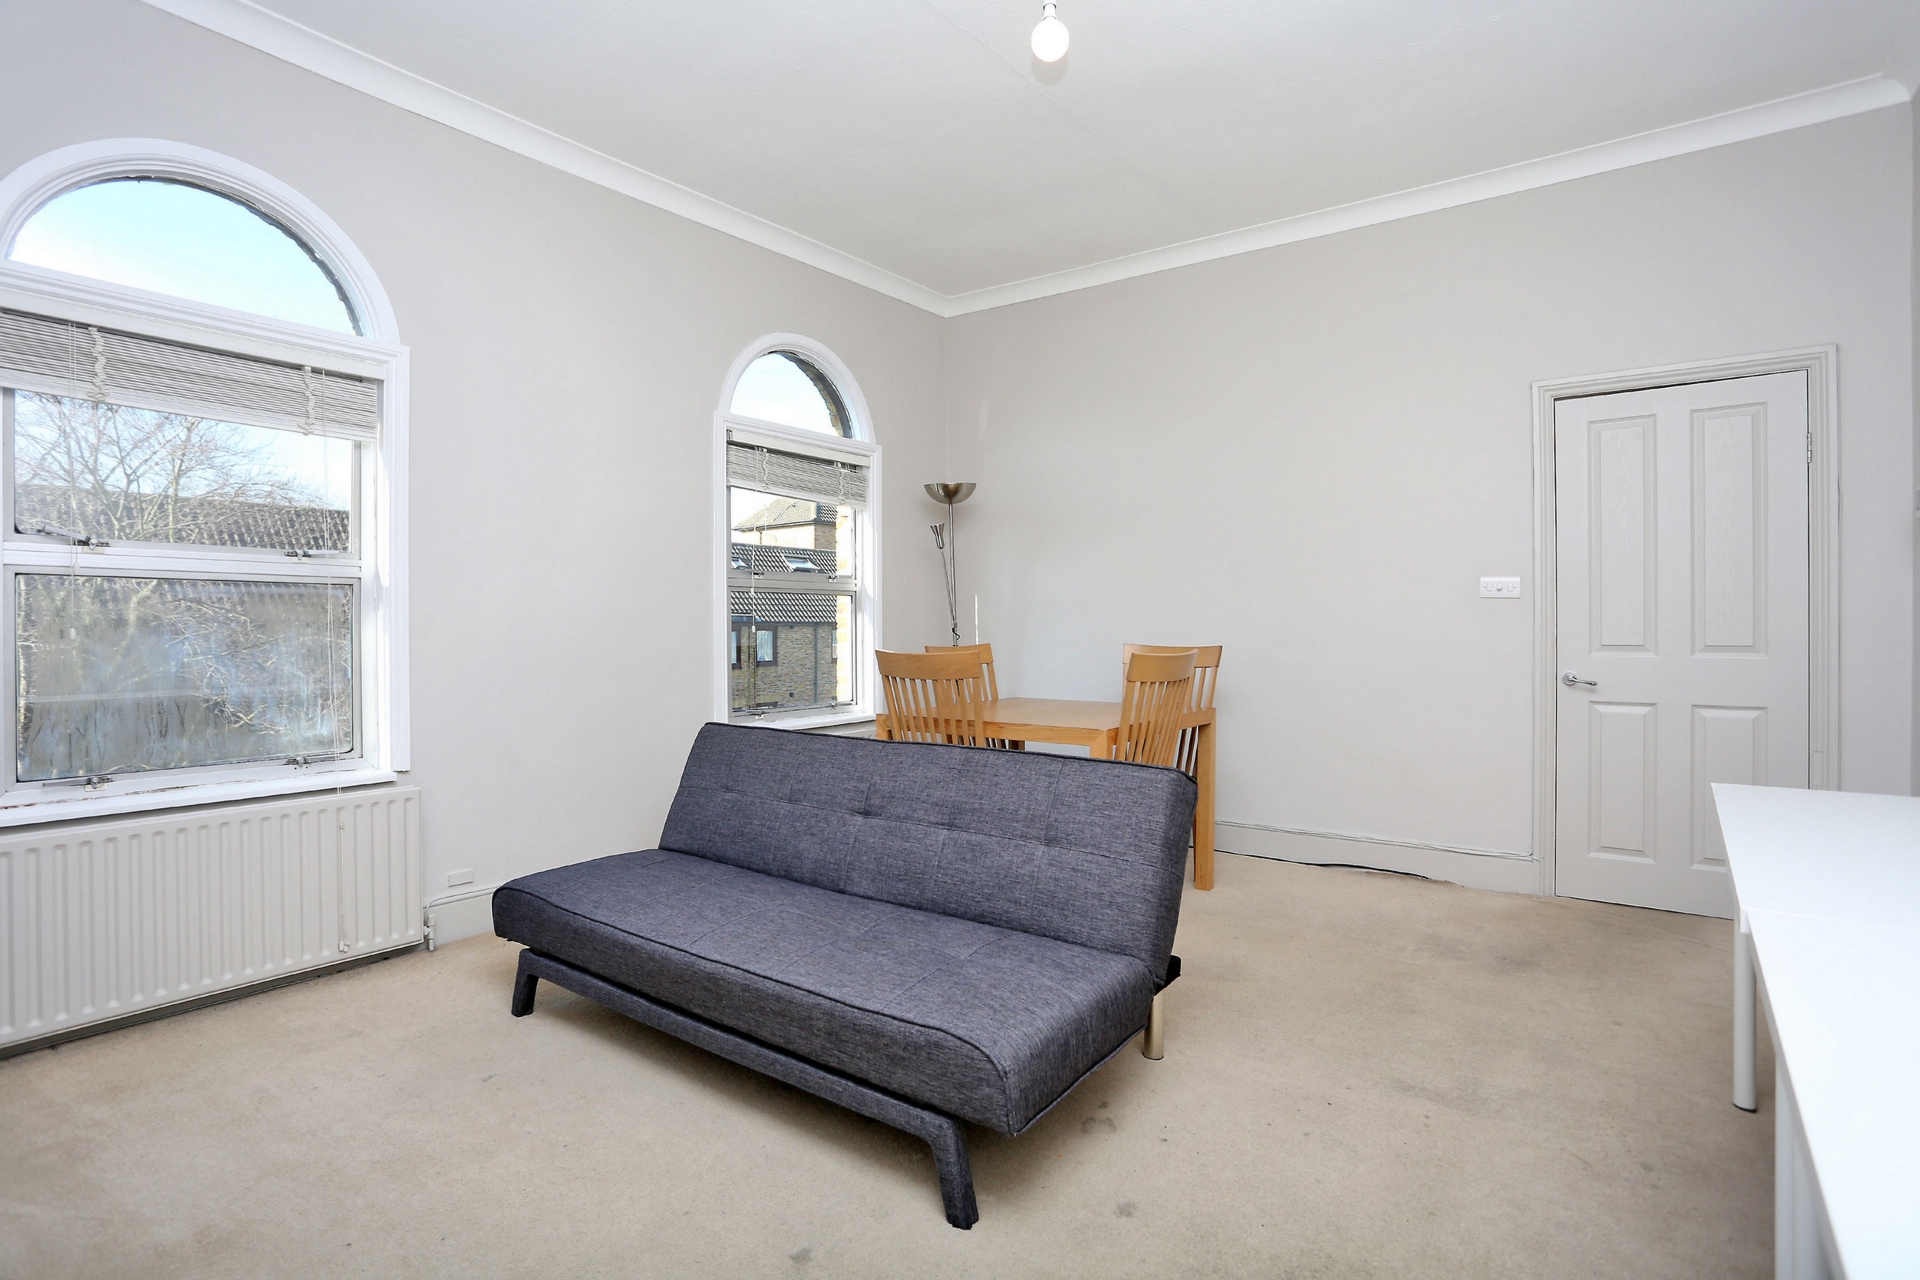 2 Bedroom Flat to rent in Hanwell, London, W7